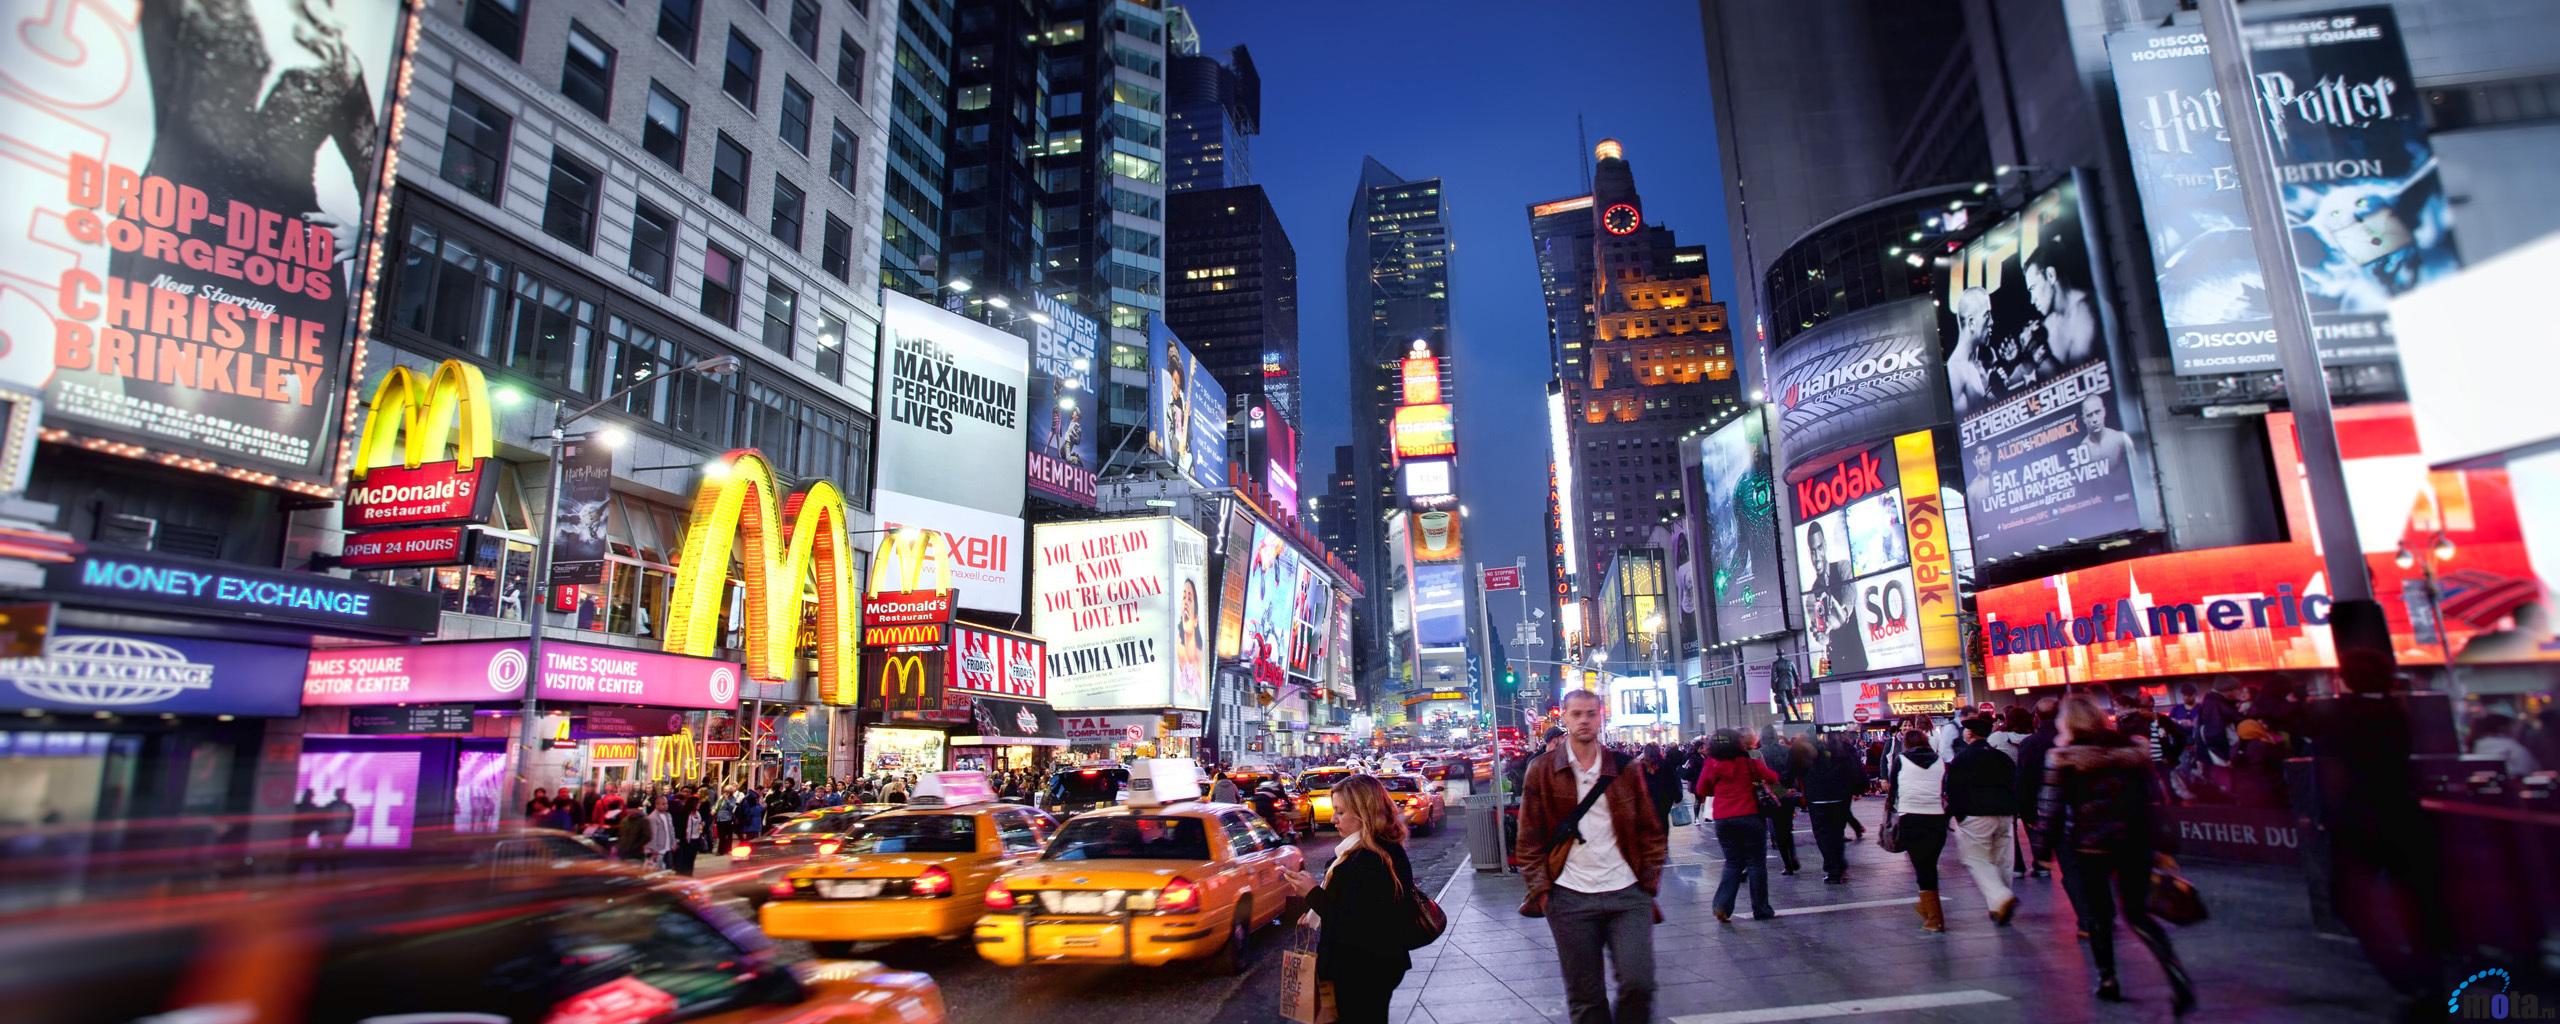 Download Wallpaper New York Taxi, Times Square (2560 x 1024 Dual ...